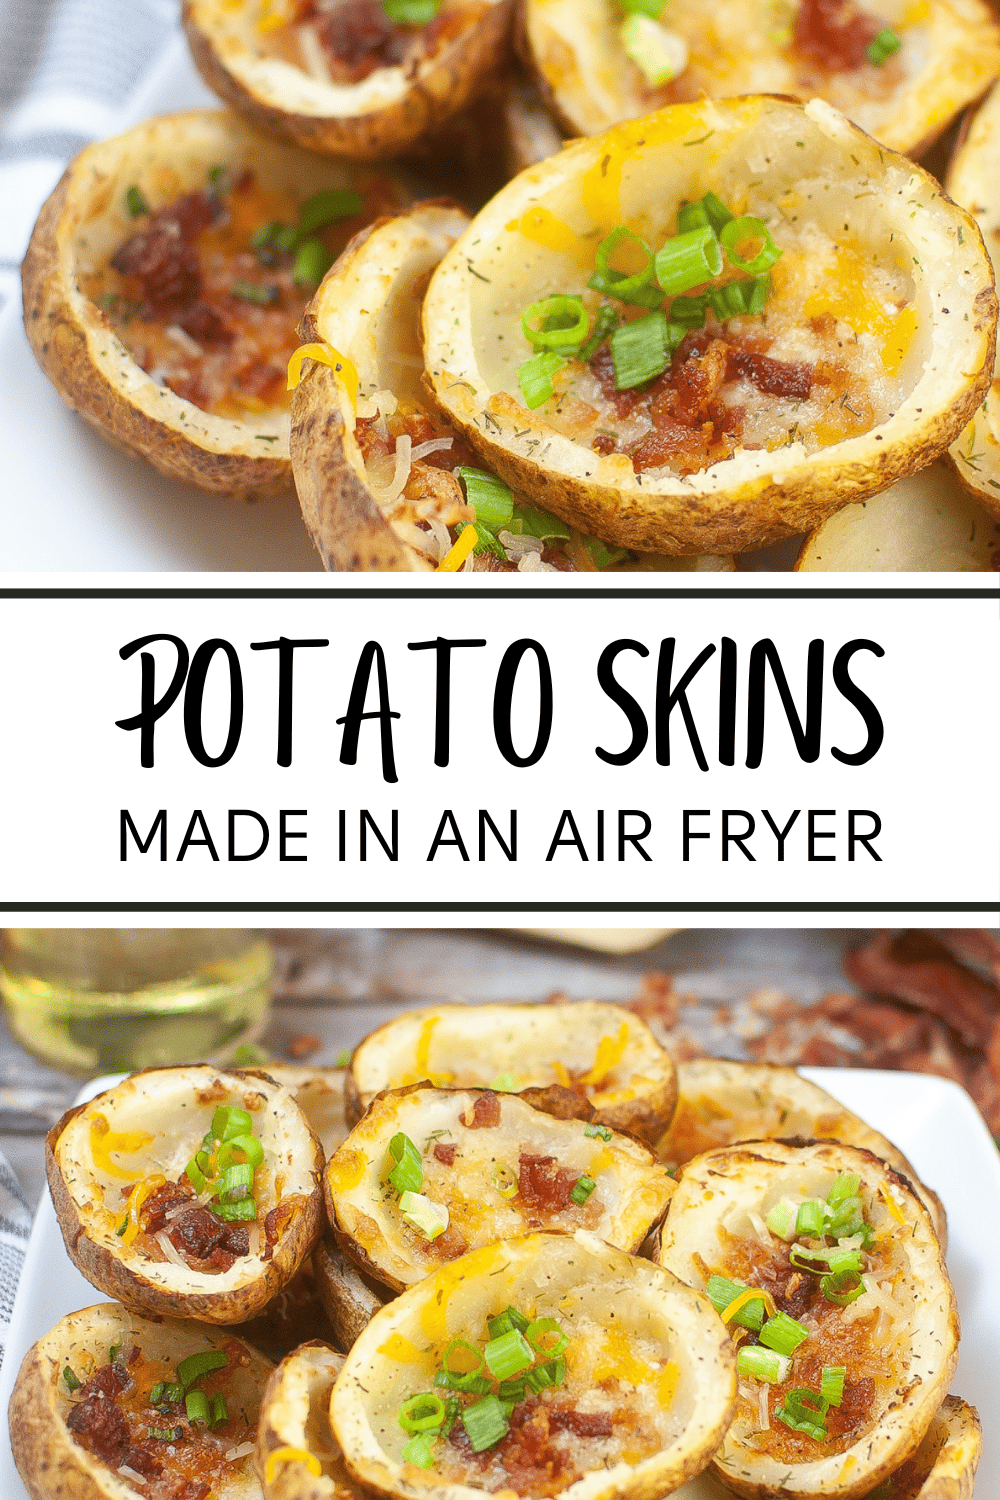 These Air Fryer Potato Skins are crispy, flavorful and so much healthier than the restaurant version! They’re the perfect appetizer. #airfryerpotatoskins #airfryer #potatoskins #appetizer #recipe via @wondermomwannab